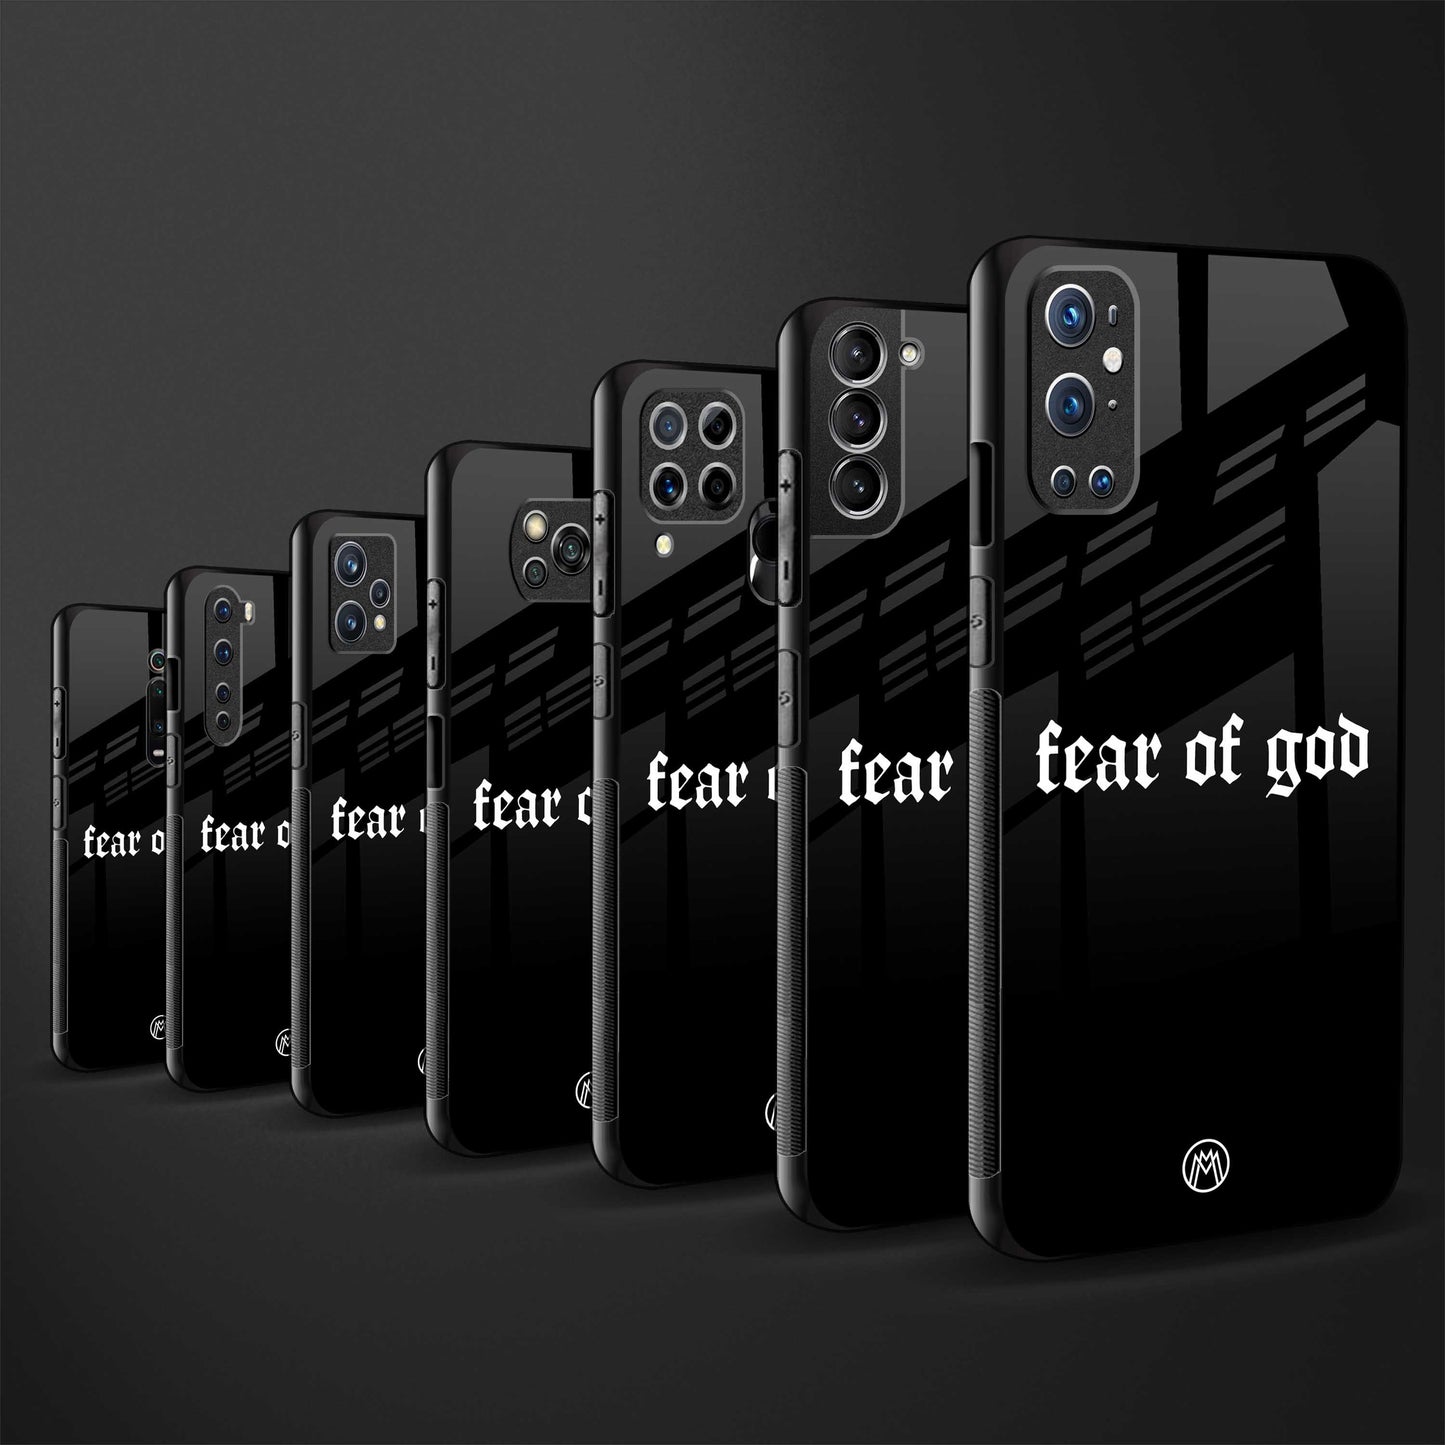 fear of god phone cover for redmi 7a